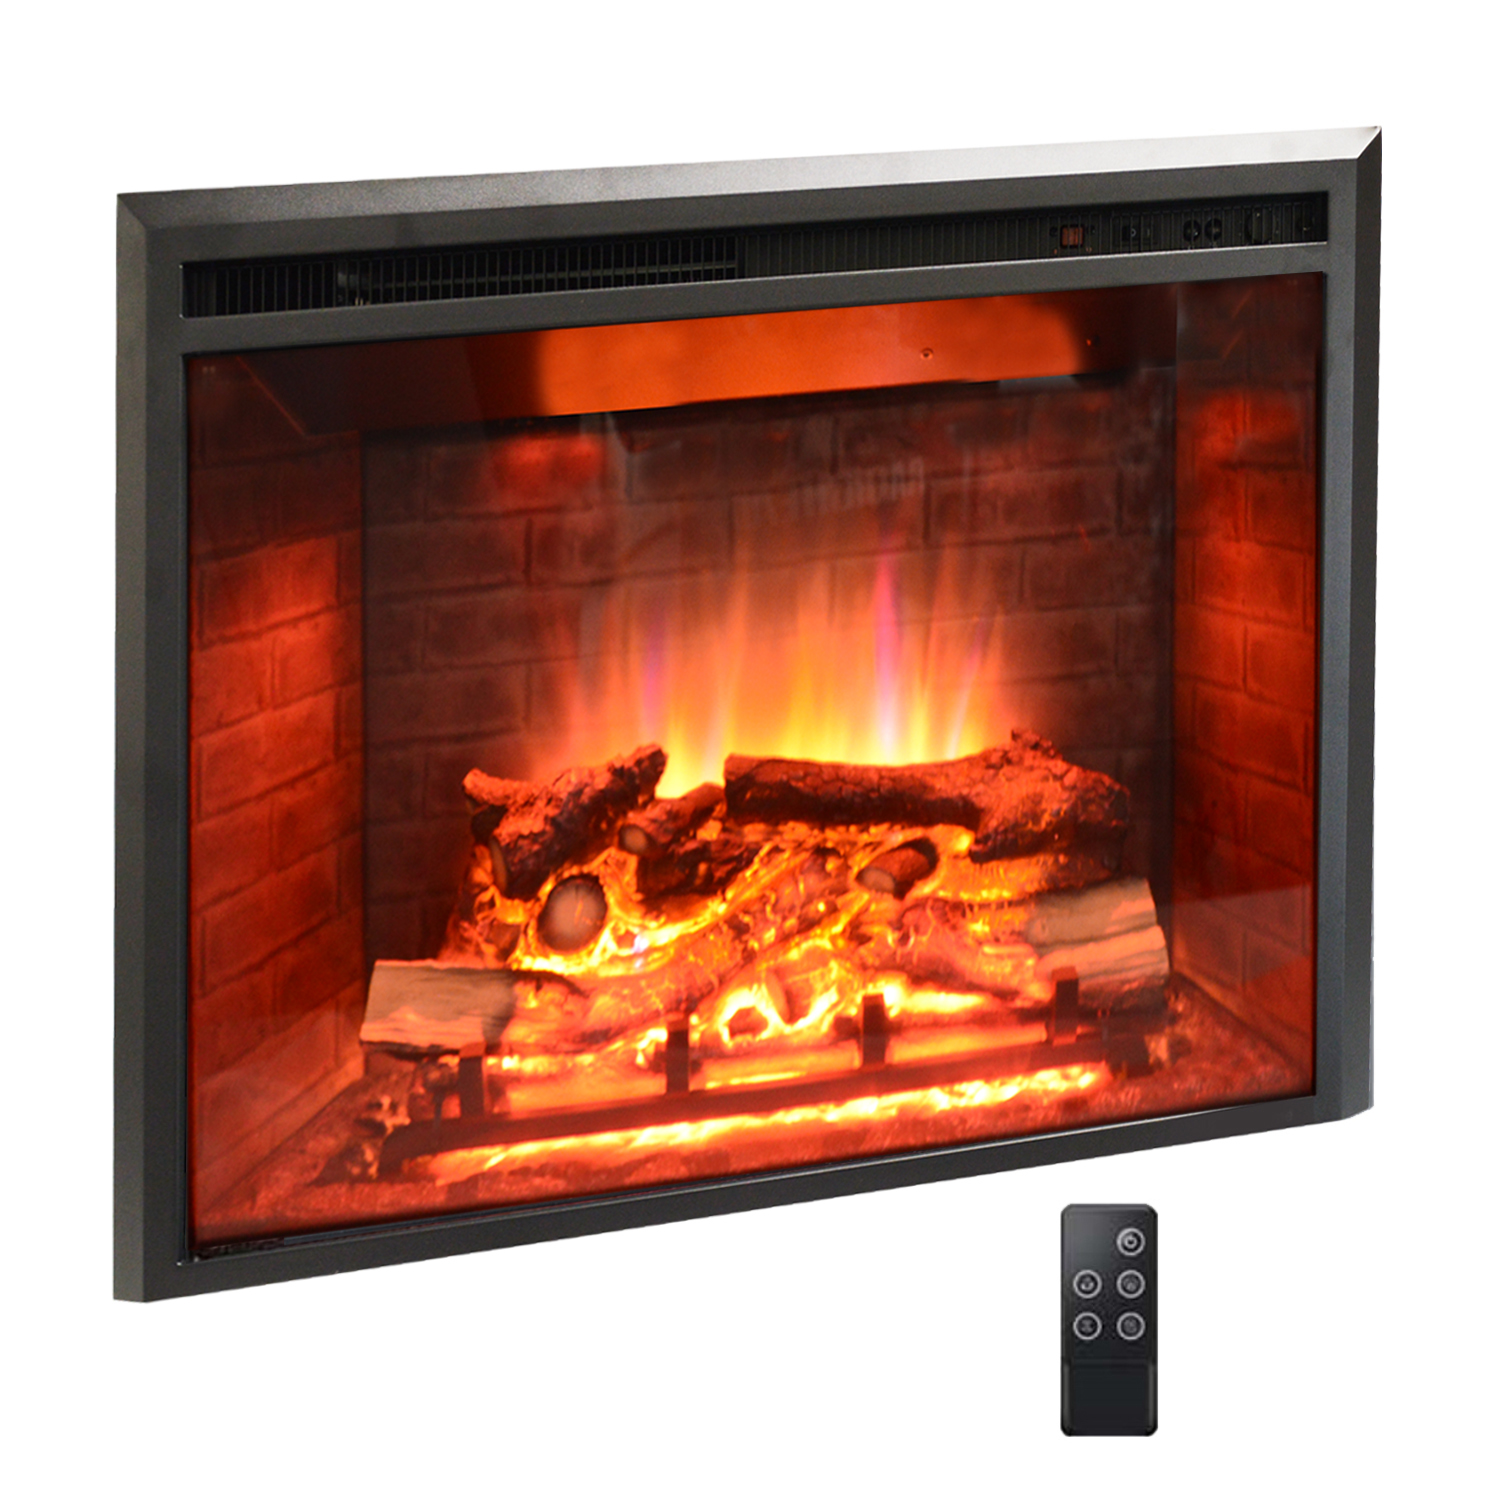 Altatac 33 inch Low Western Electric Fireplace Insert, Heater, Recessed Mounted - Black